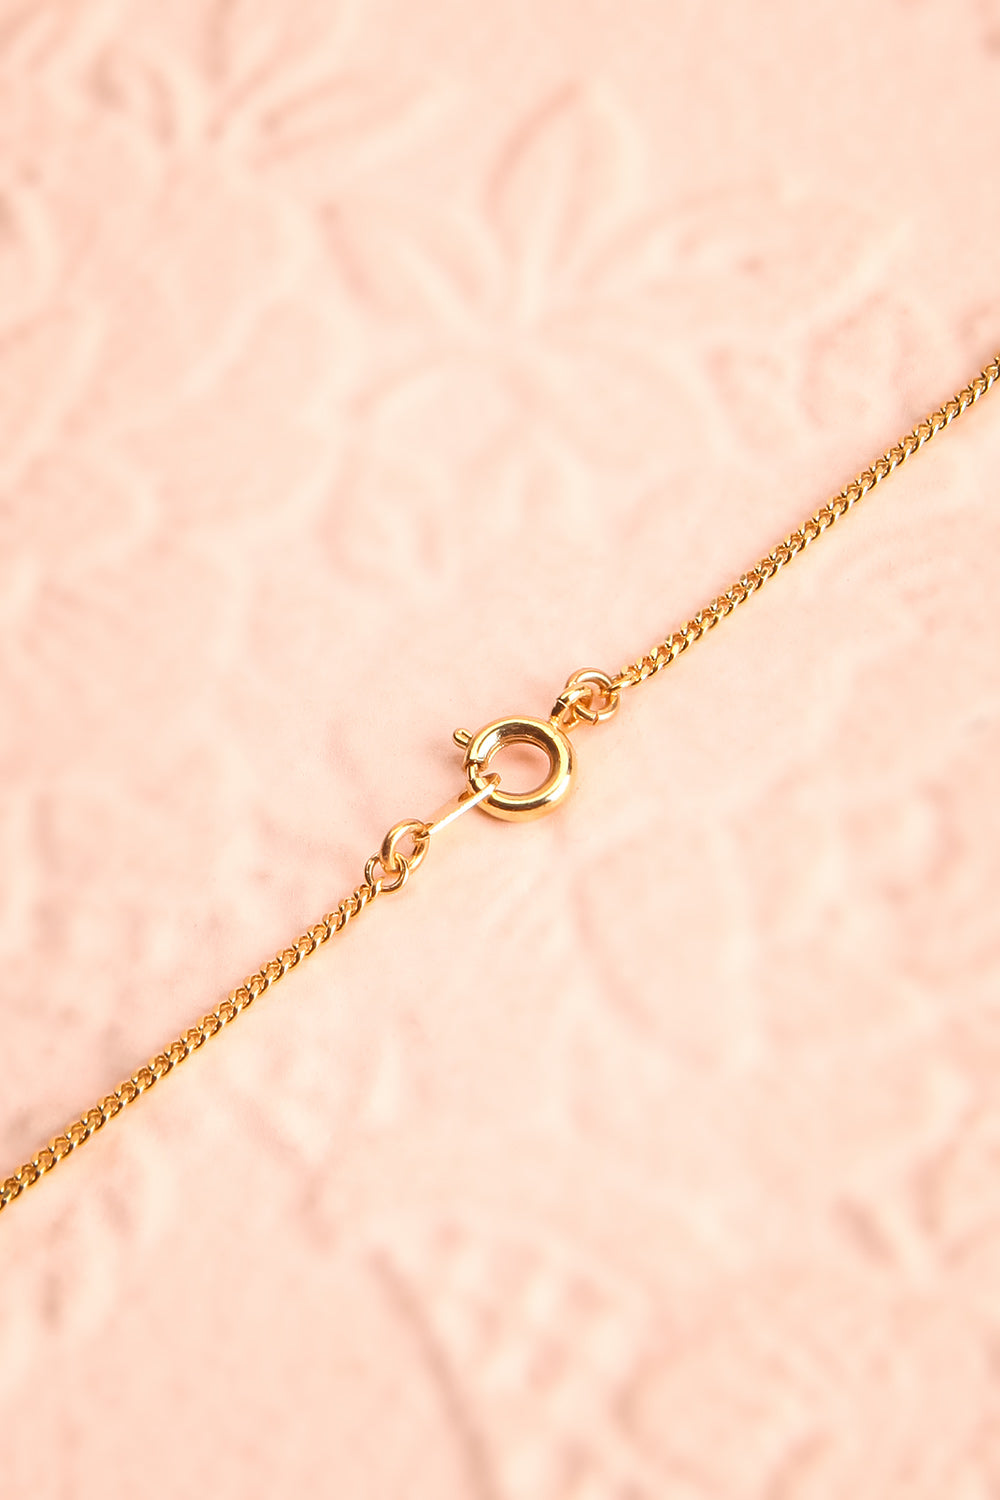 Mary Nolan Dainty Golden Pendant Necklace with Pearl | Boutique 1861 5